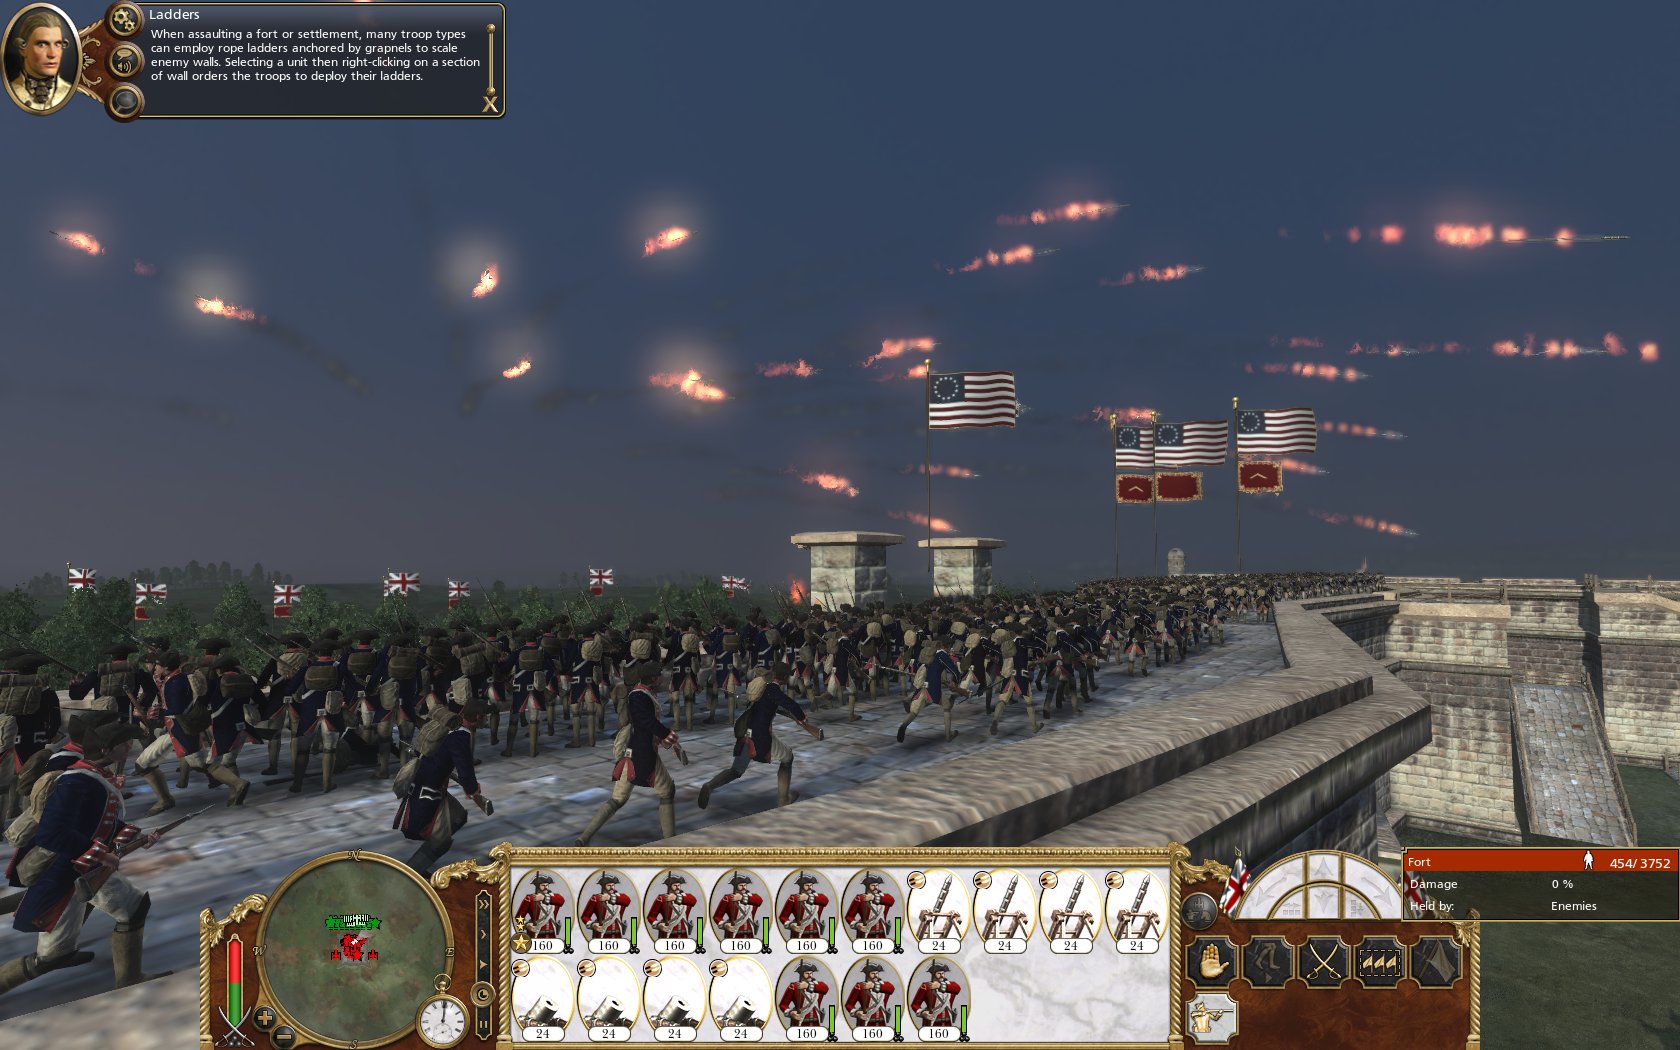 is there any way to play empire total war without steam